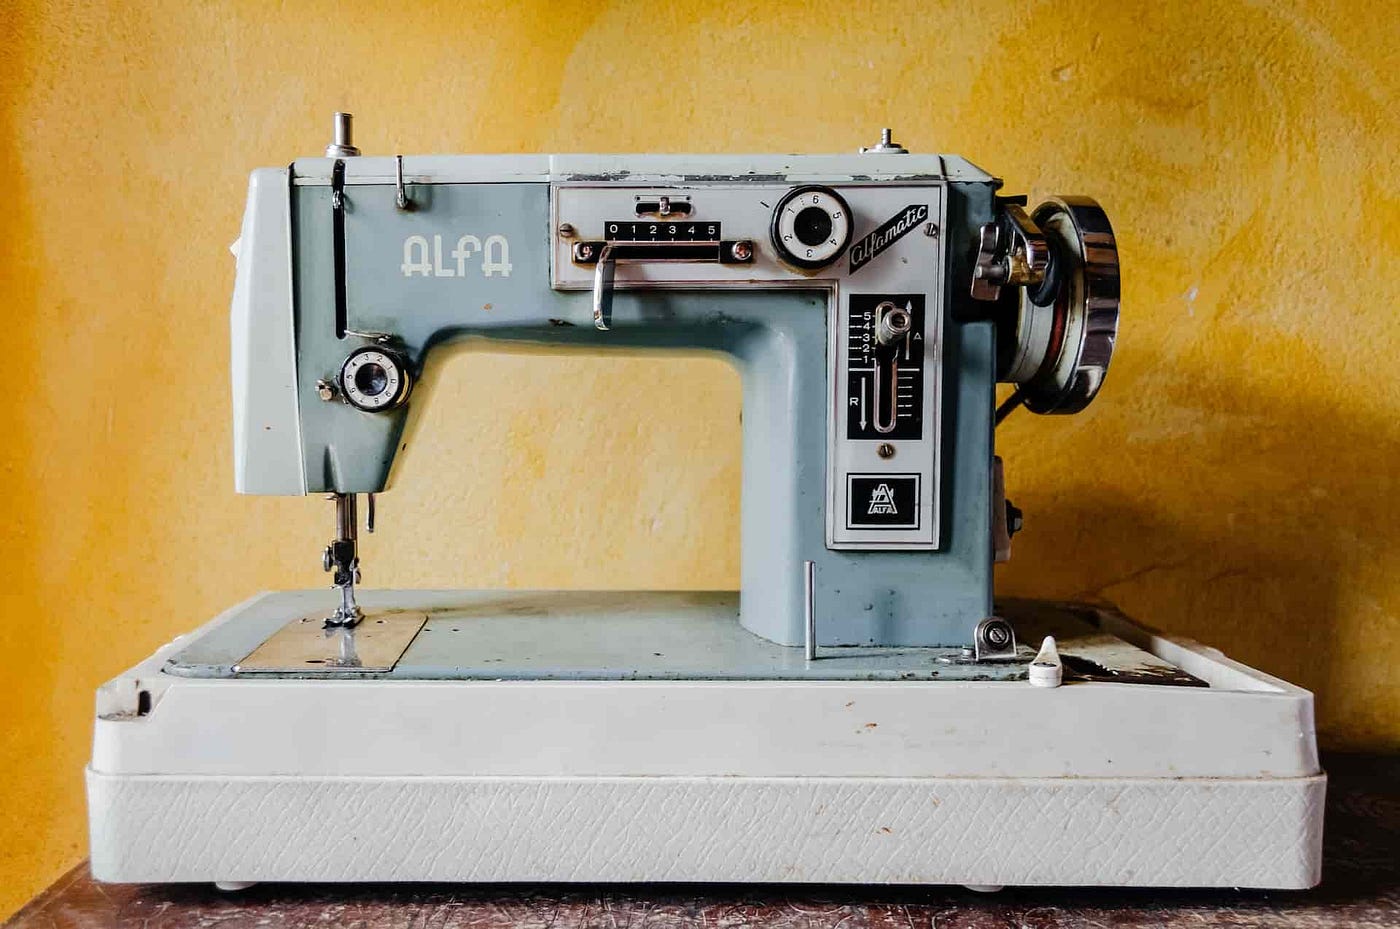 Sewing Machines: What Oil Should You Use? 